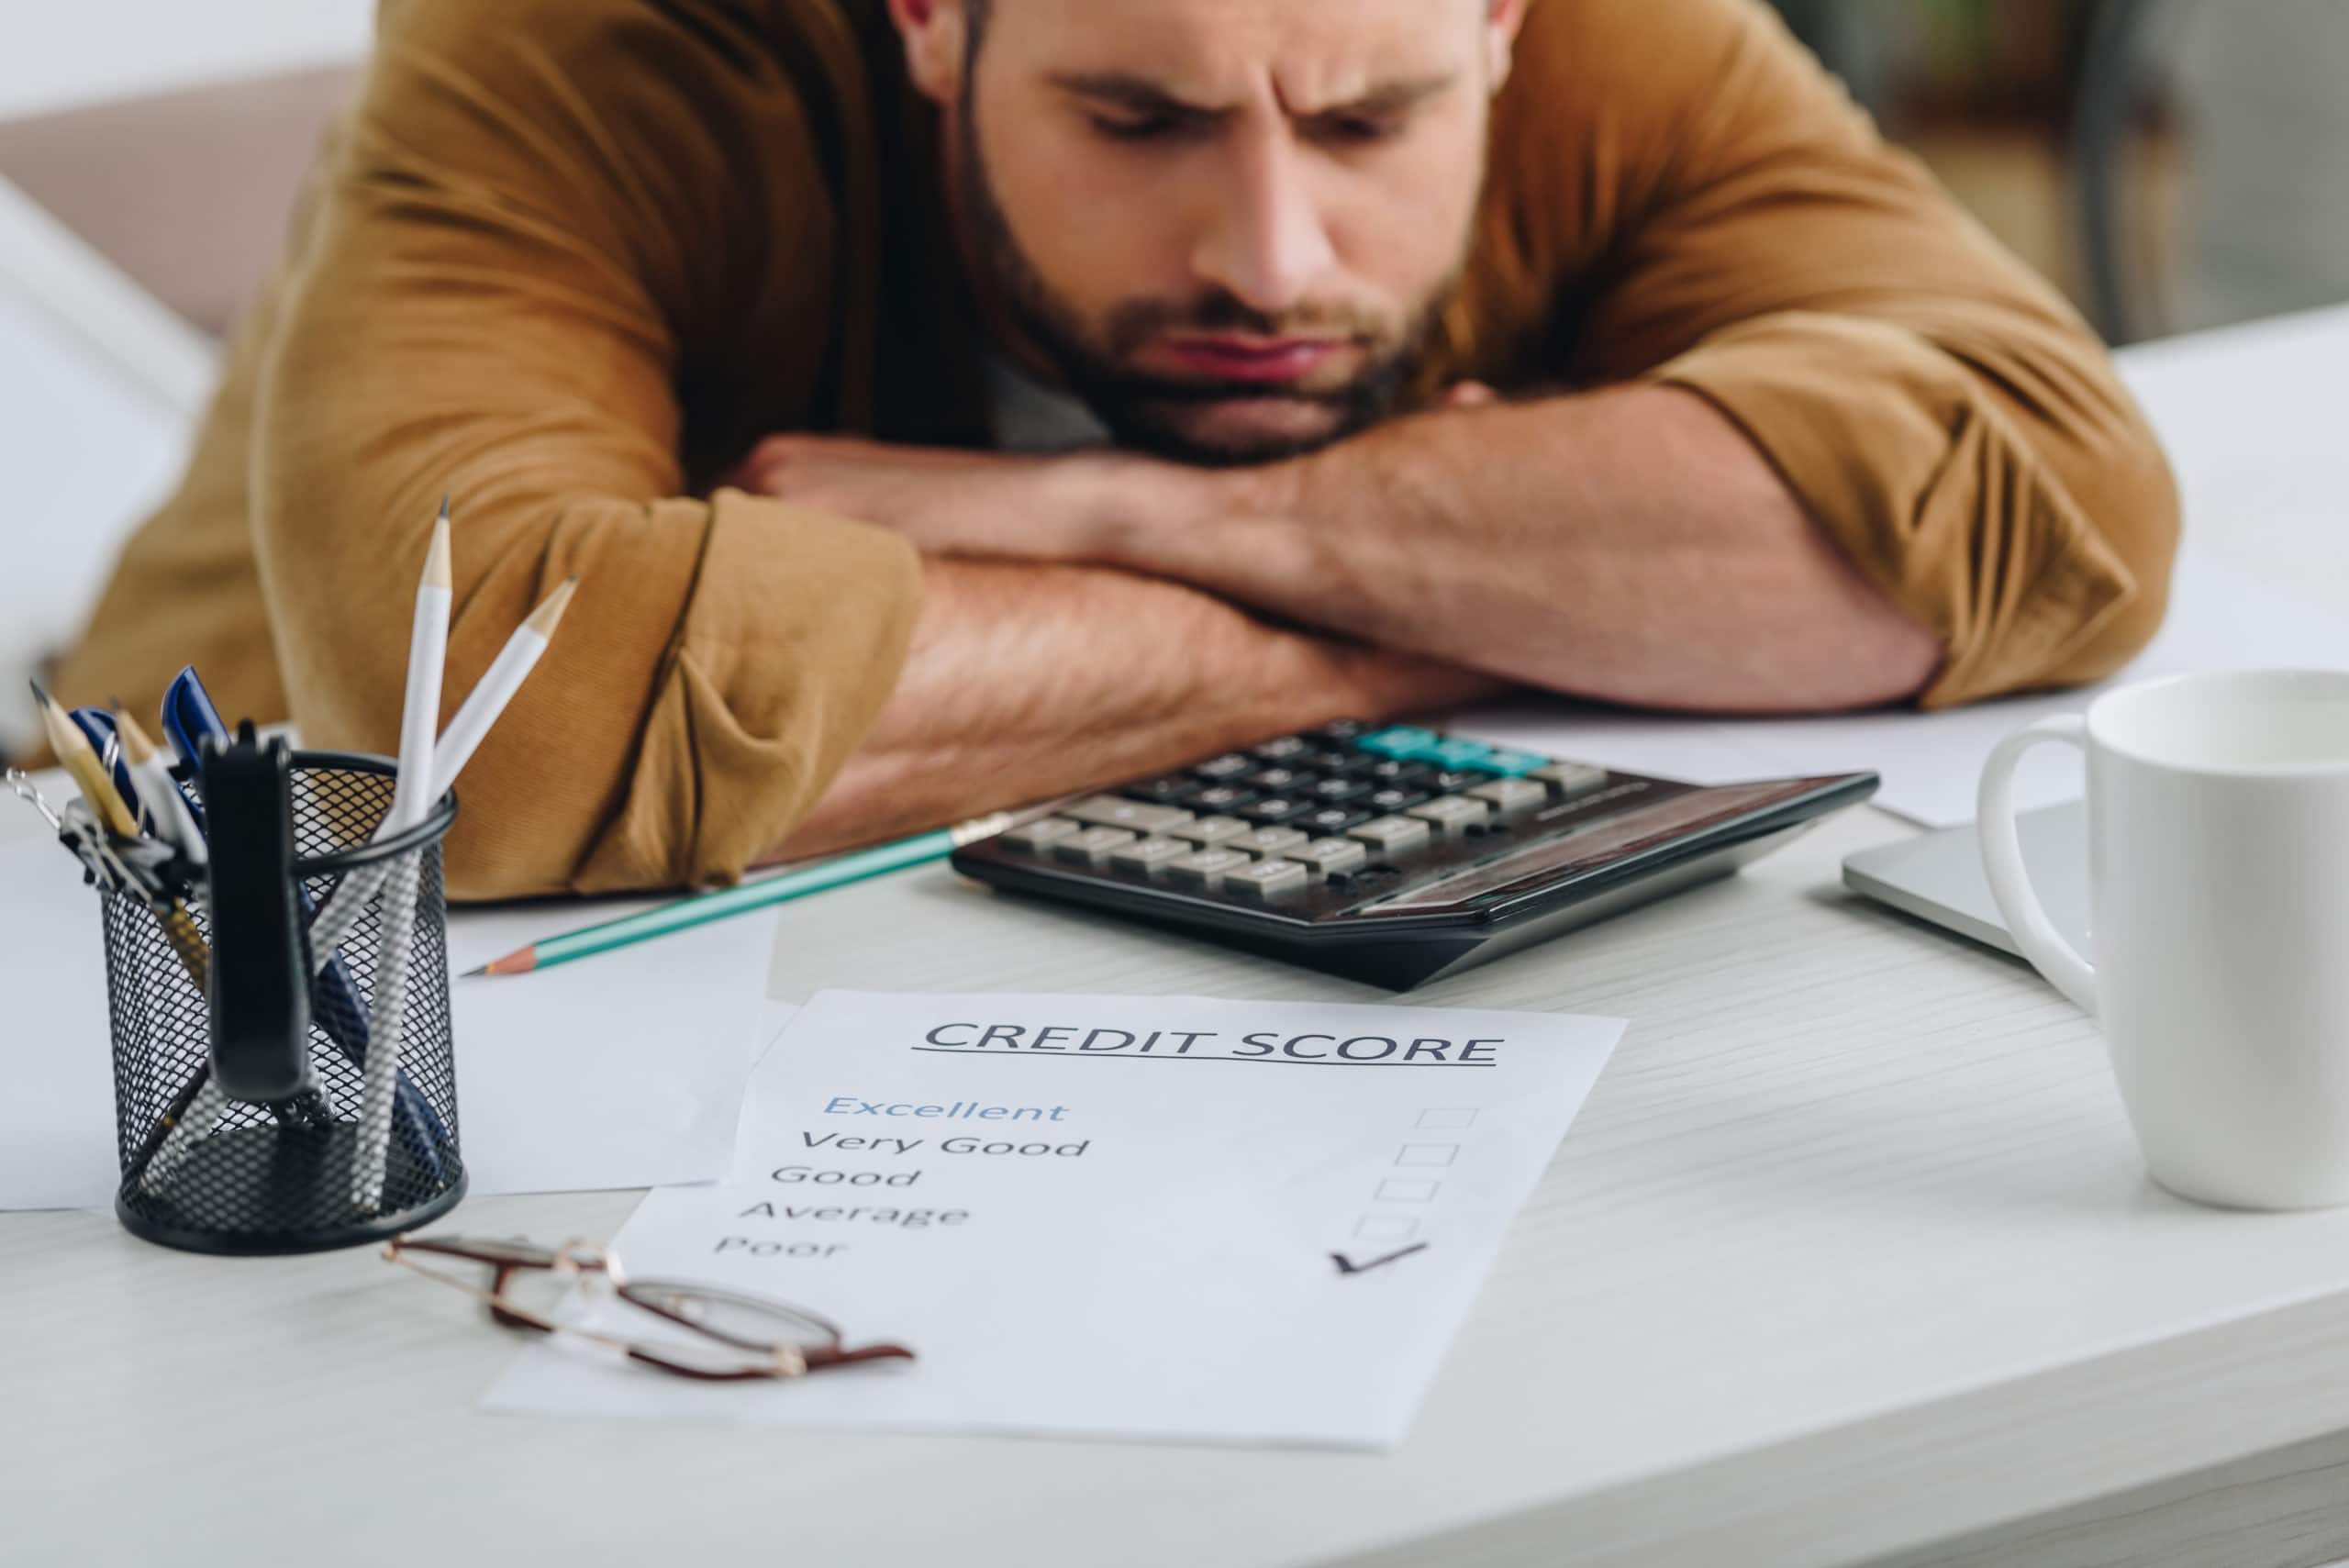 a sad man with closed eyes has credit score